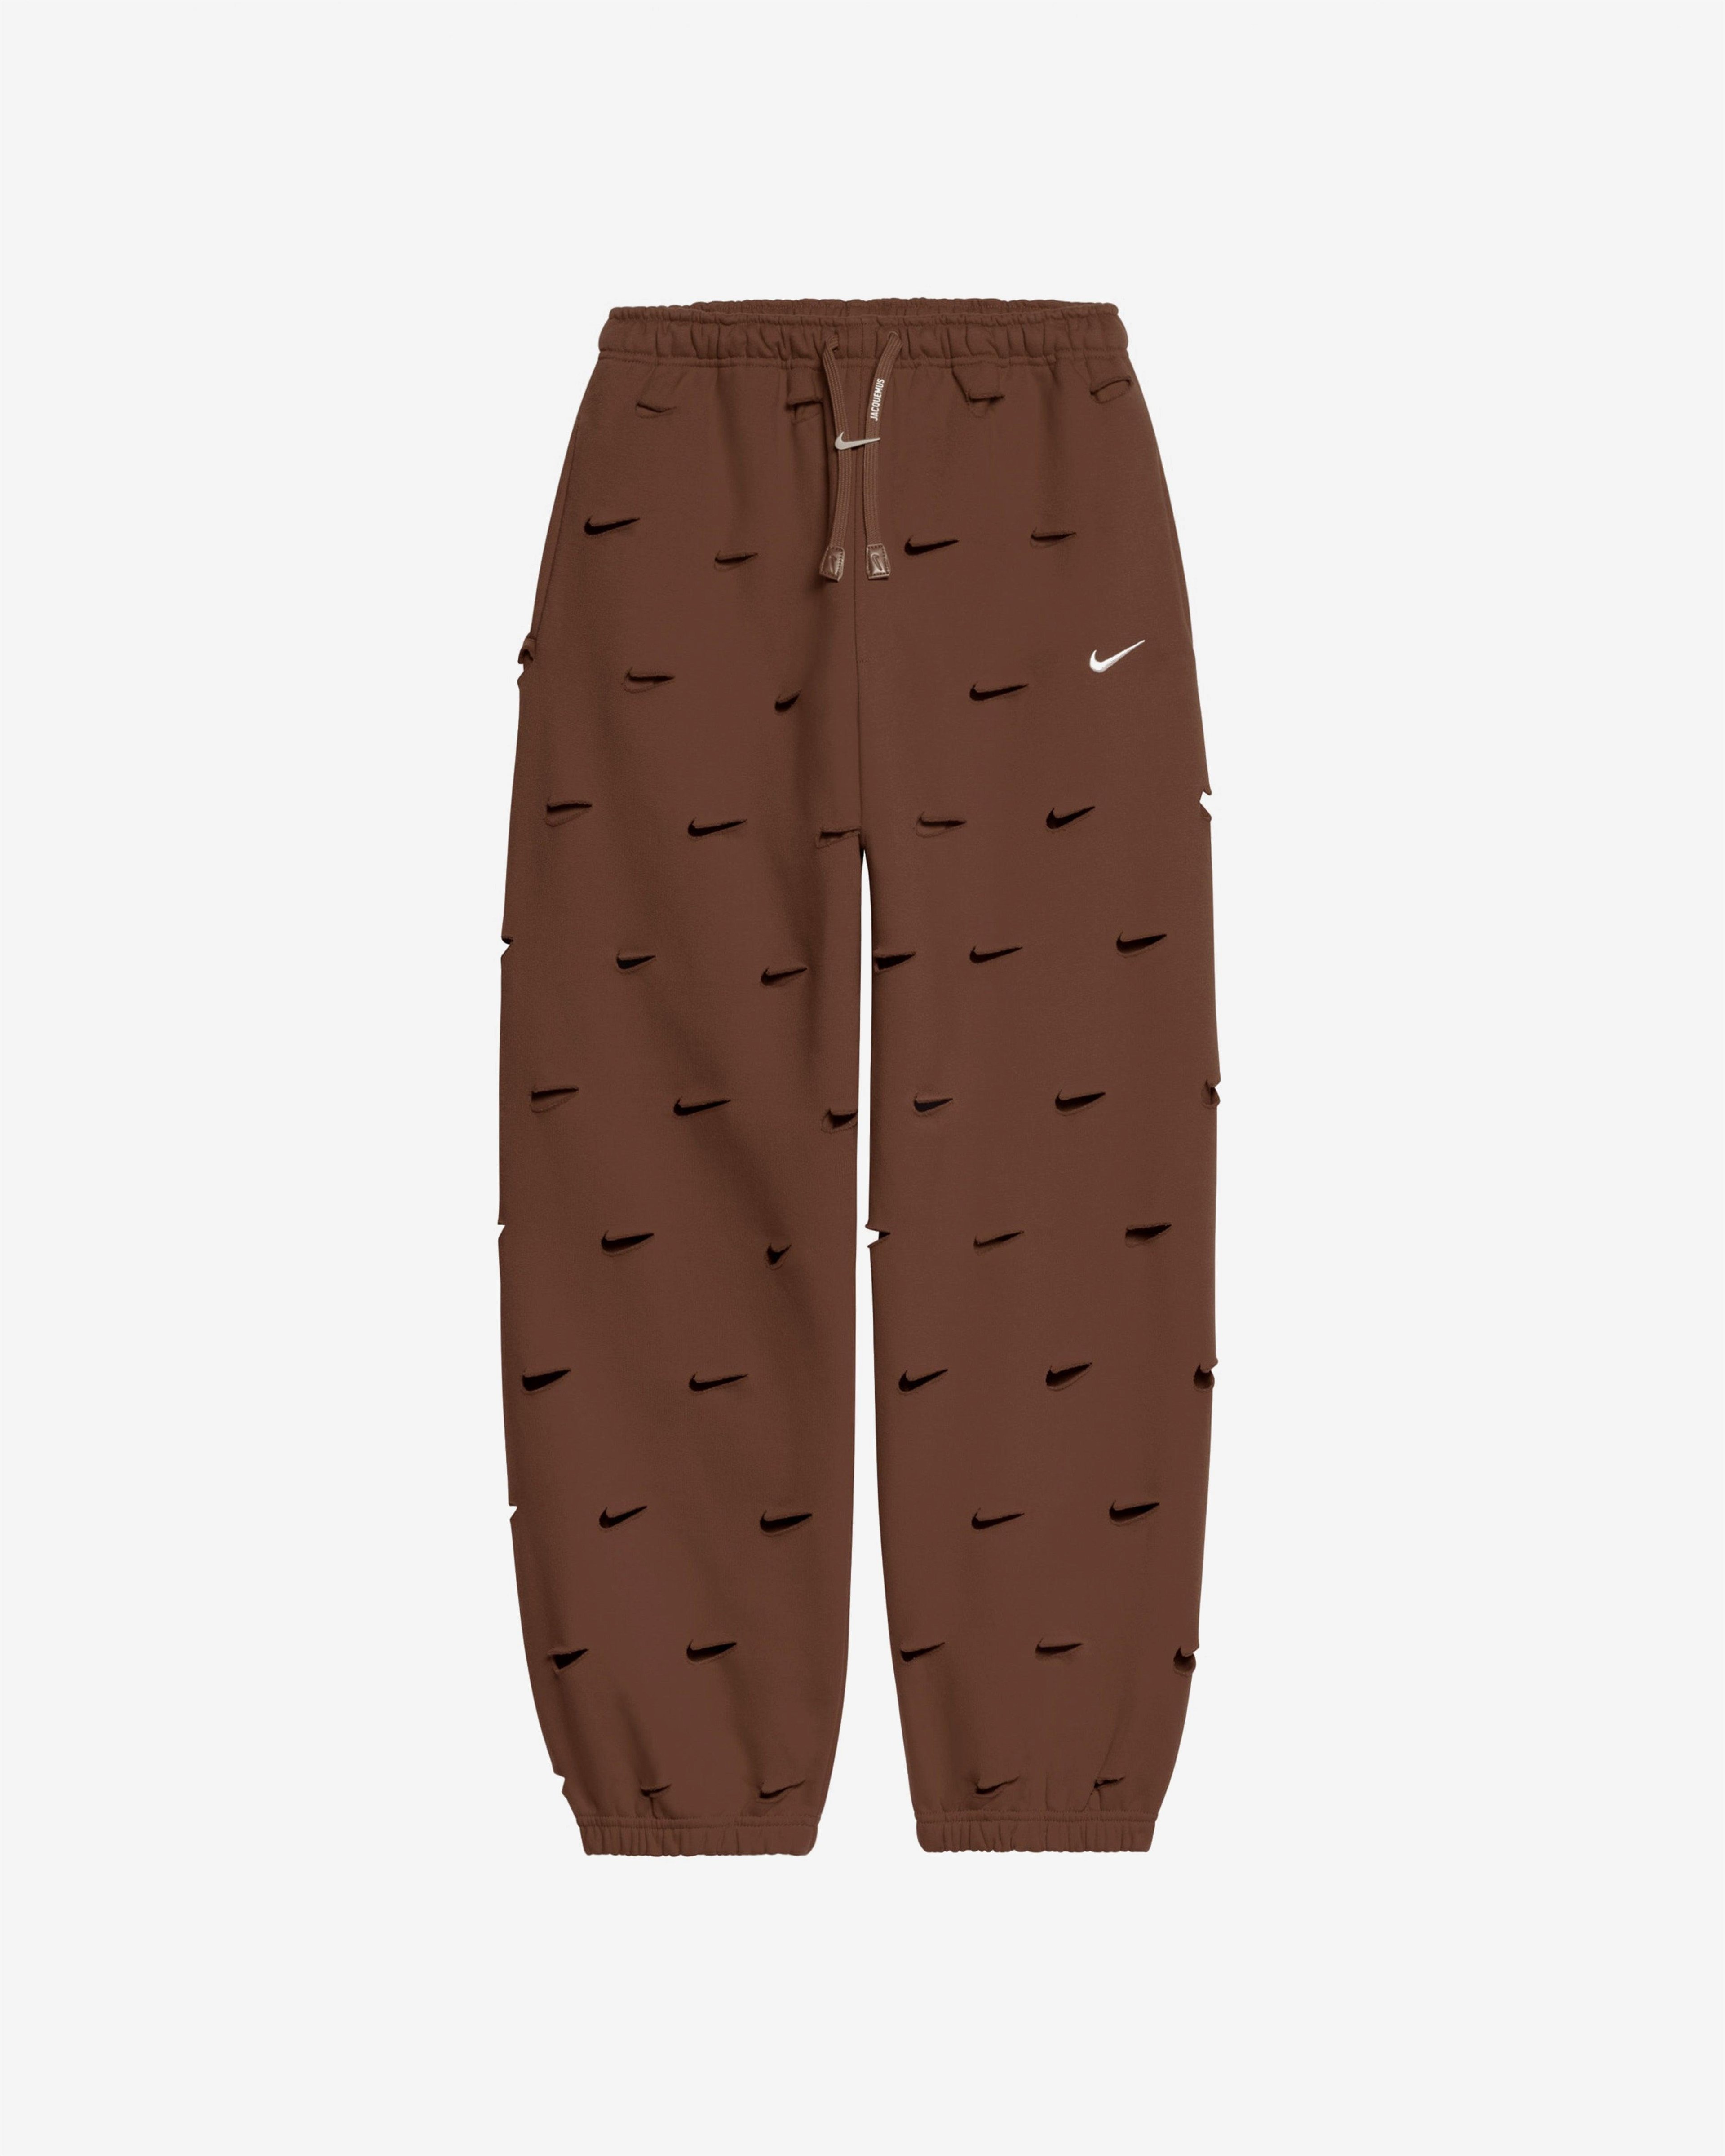 Nike - Jacquemus Swoosh Sweatpants - (Cacao) by NIKE